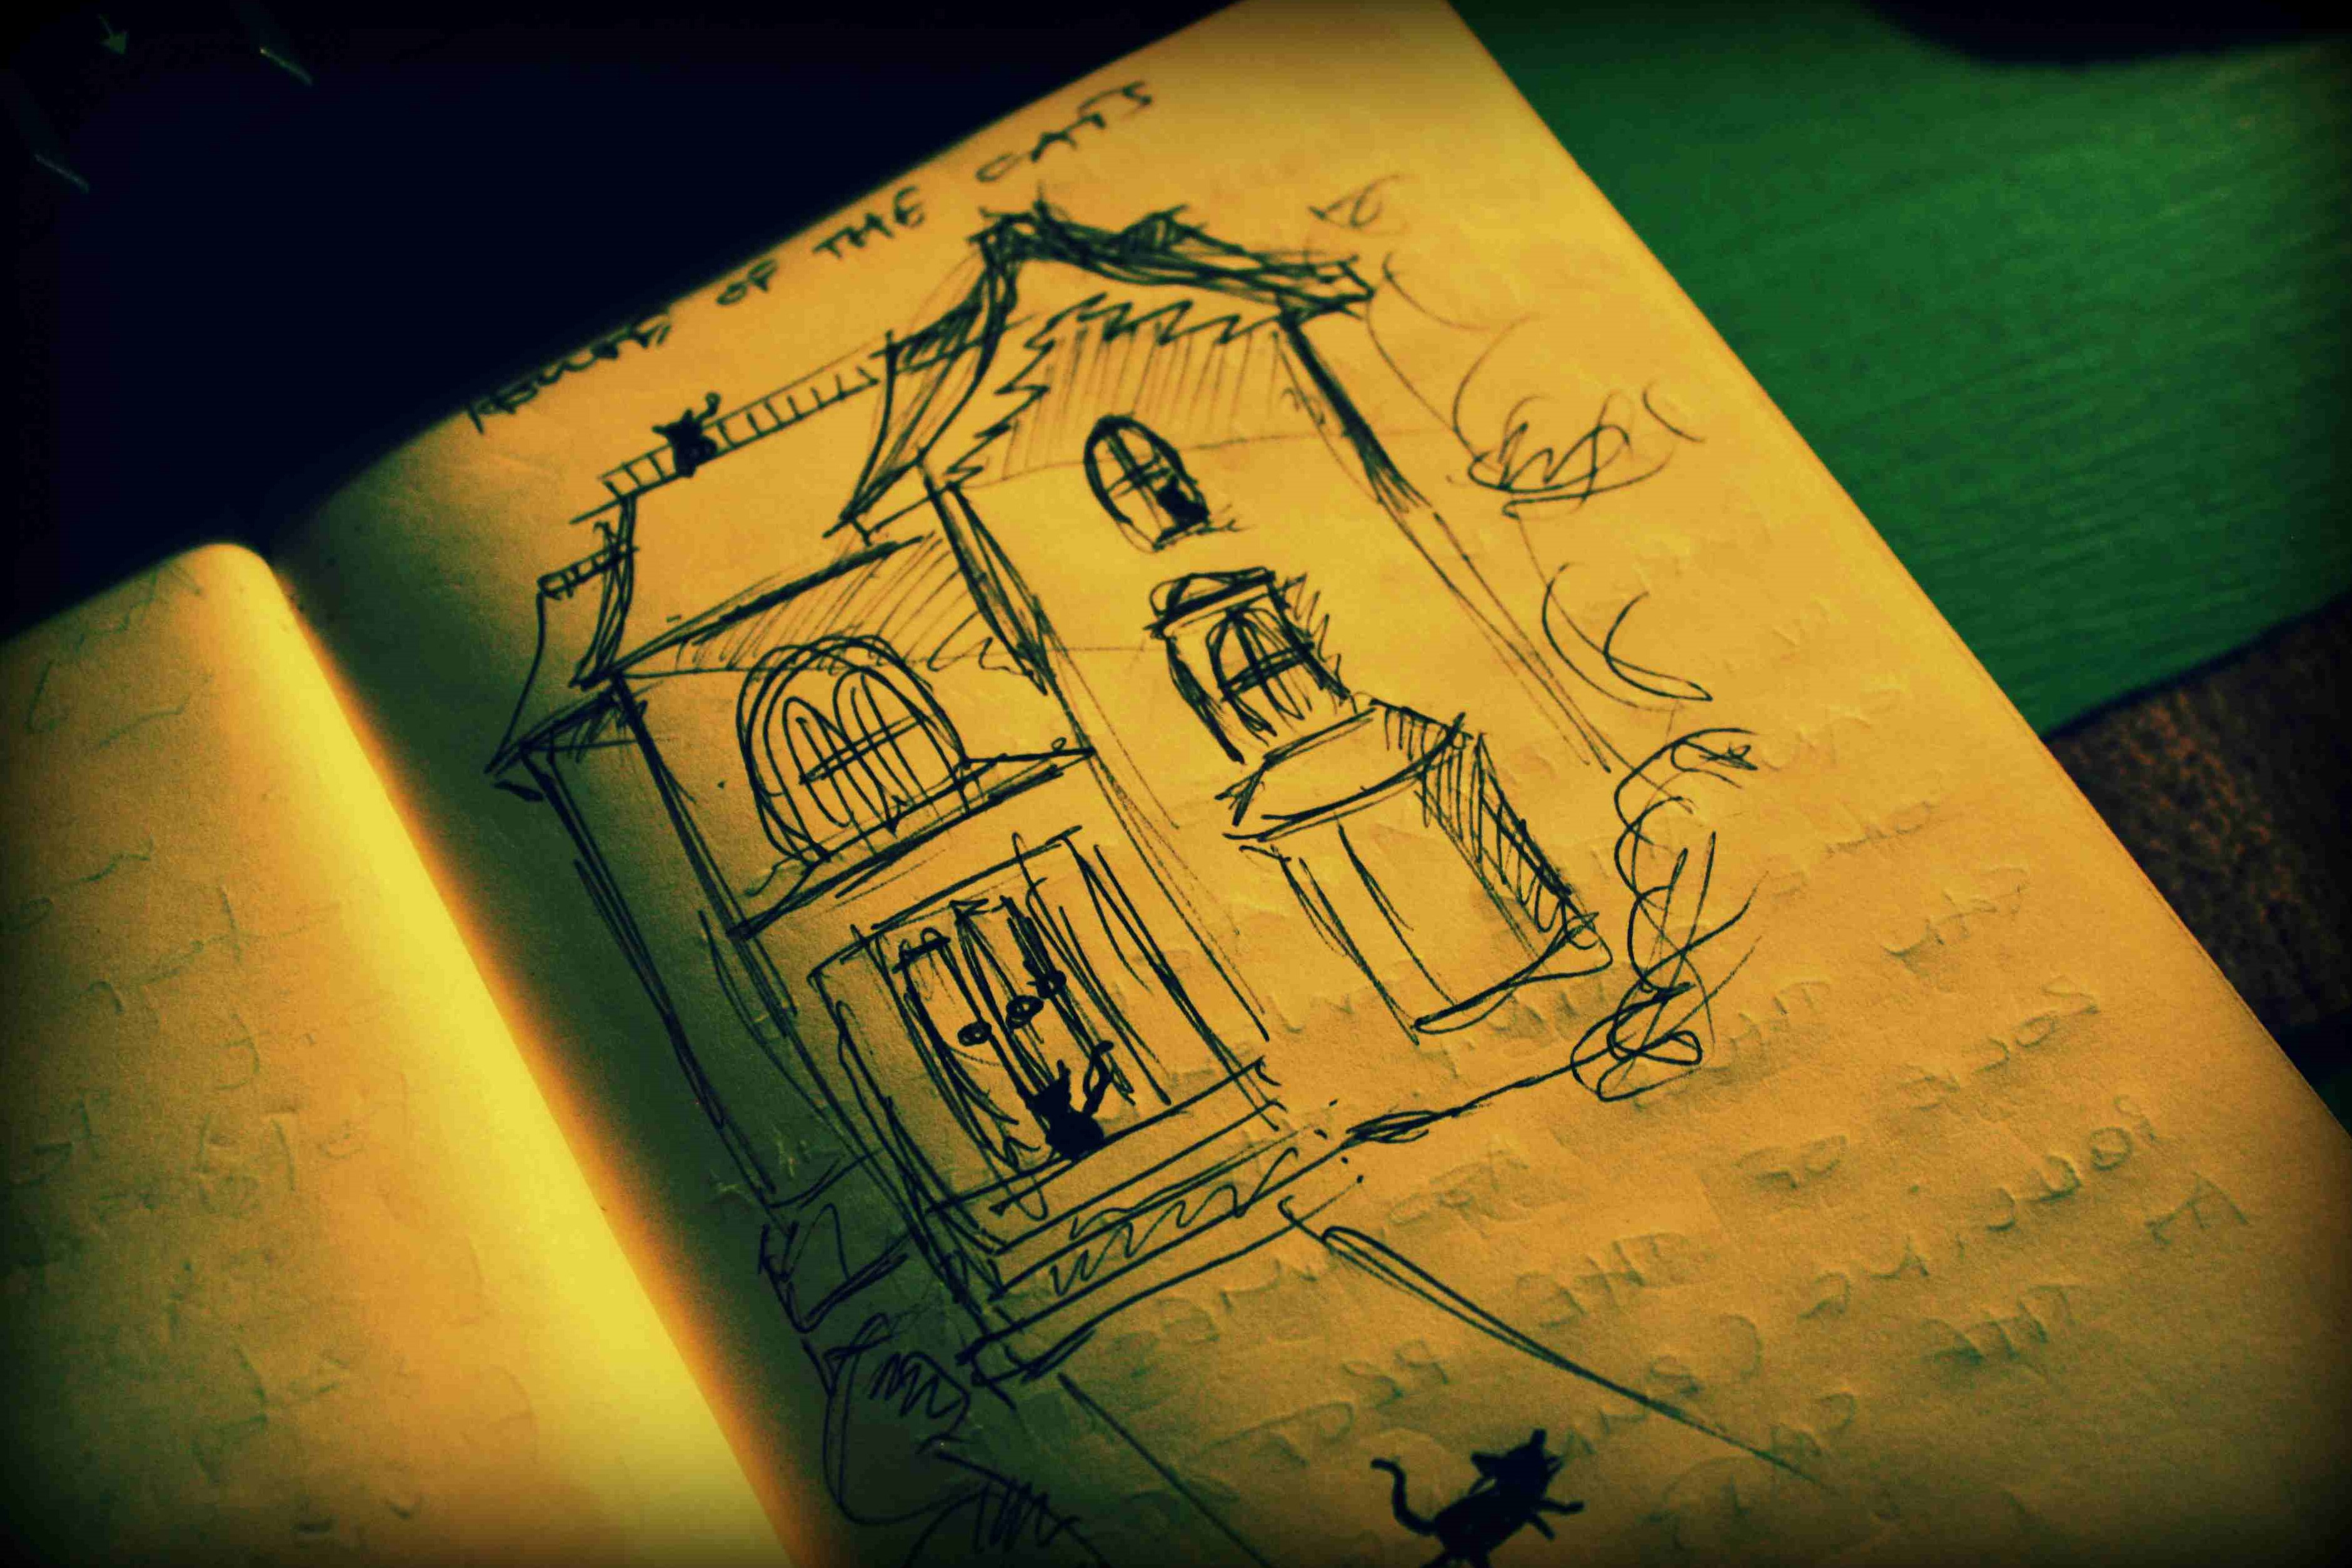 Sketch of the house where the cats live